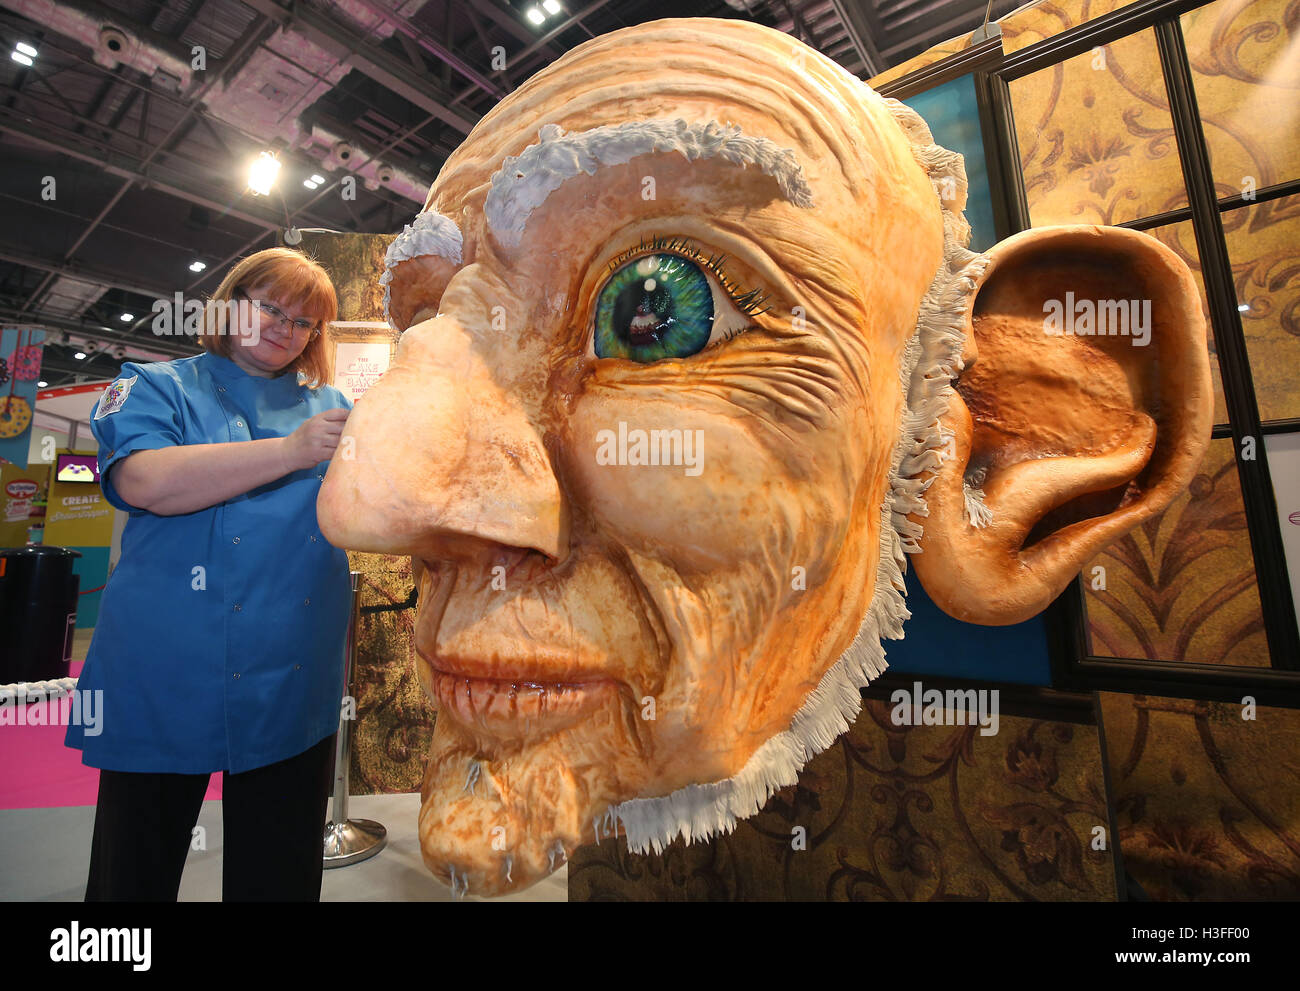 Sugar artist Jacqui Kelly puts the finishing touches to her sugar sculpture  of Roald Dahl's BGF before the start of the Cake and Bake Show at ExCeL in  London Stock Photo -